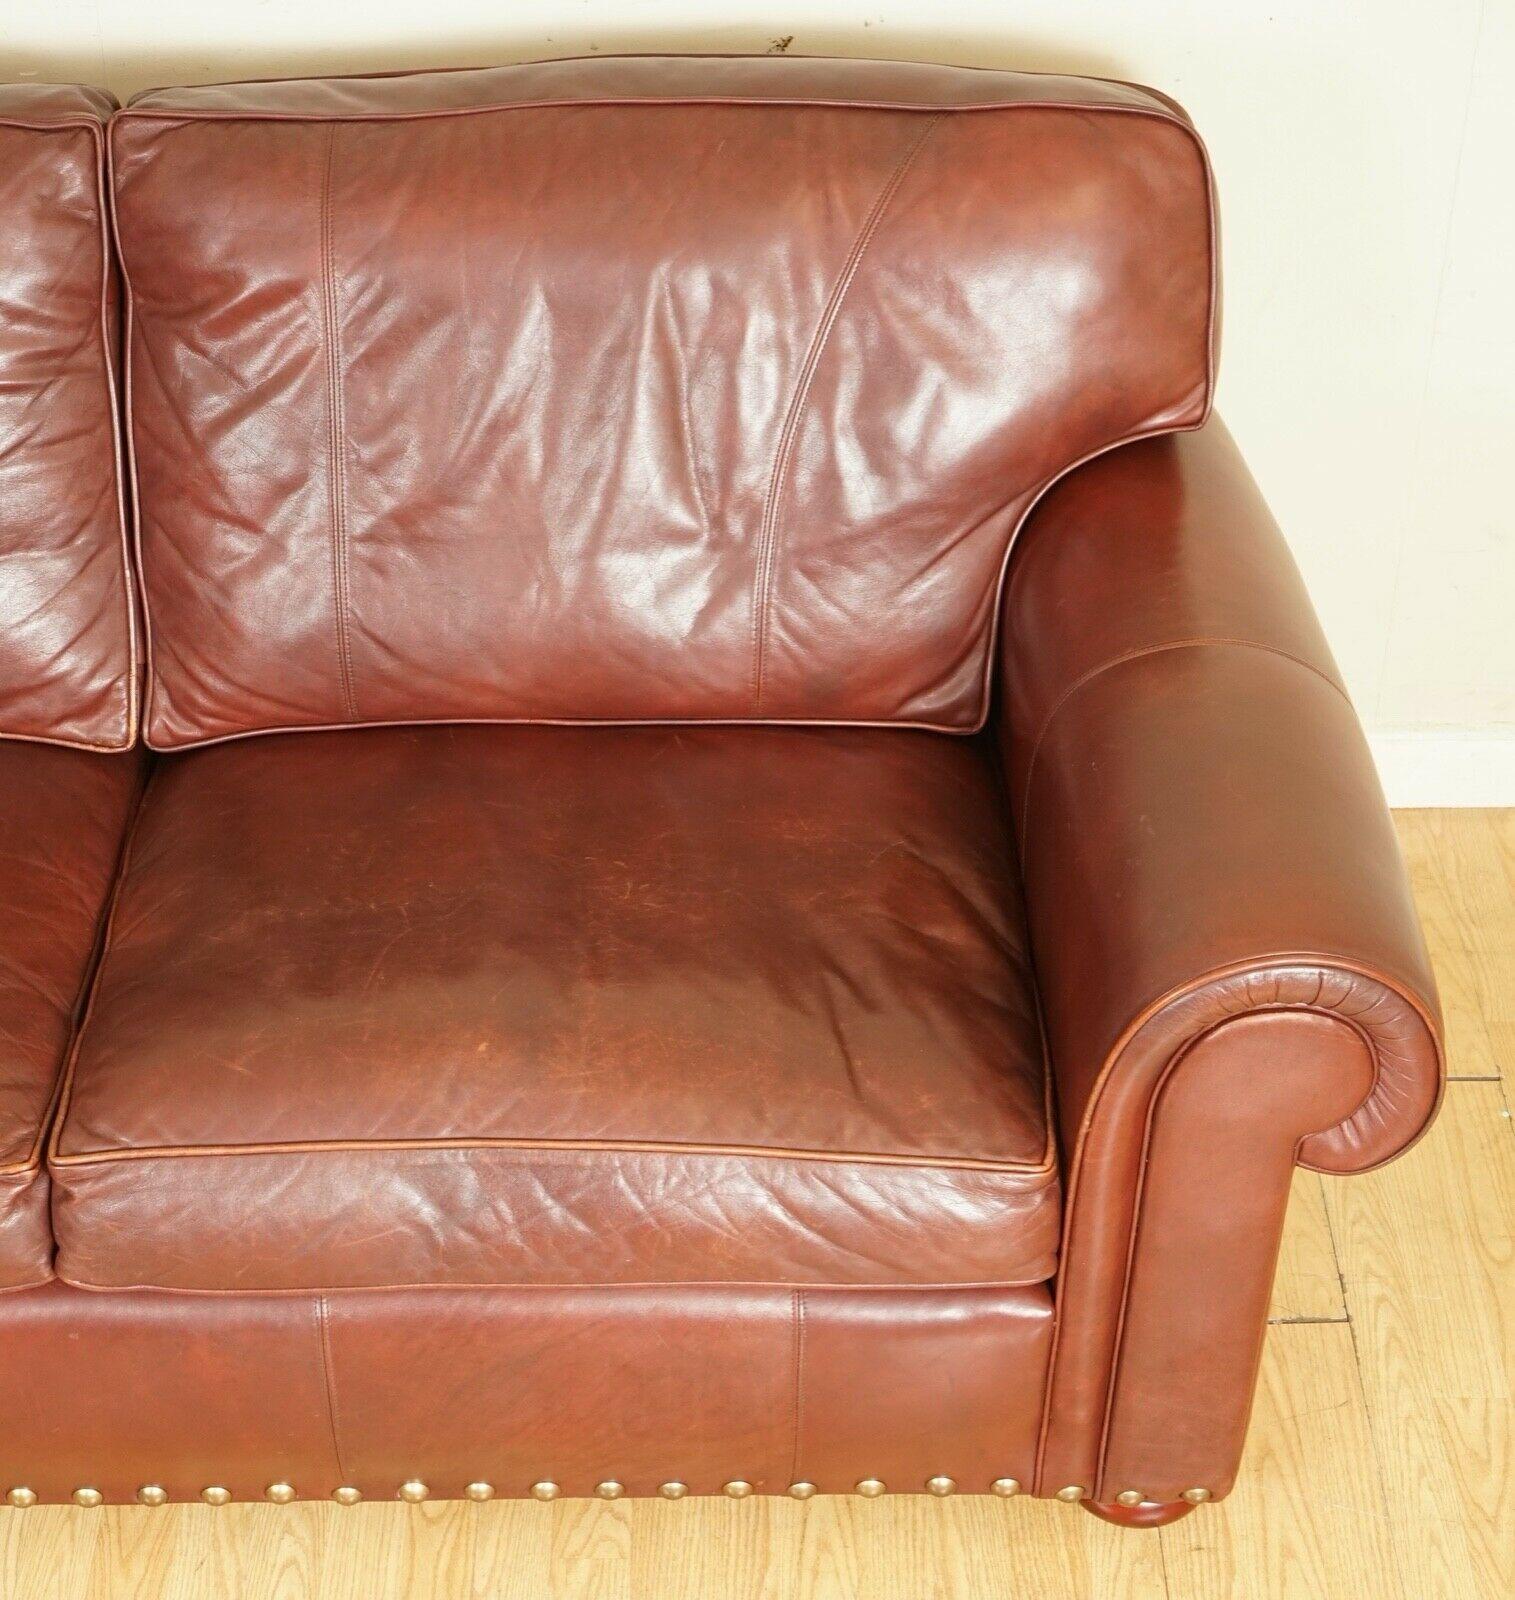 Hand-Crafted Stunning Wade Upholstery Redish Brown Two Seater Sofa, Grand Sofa Available